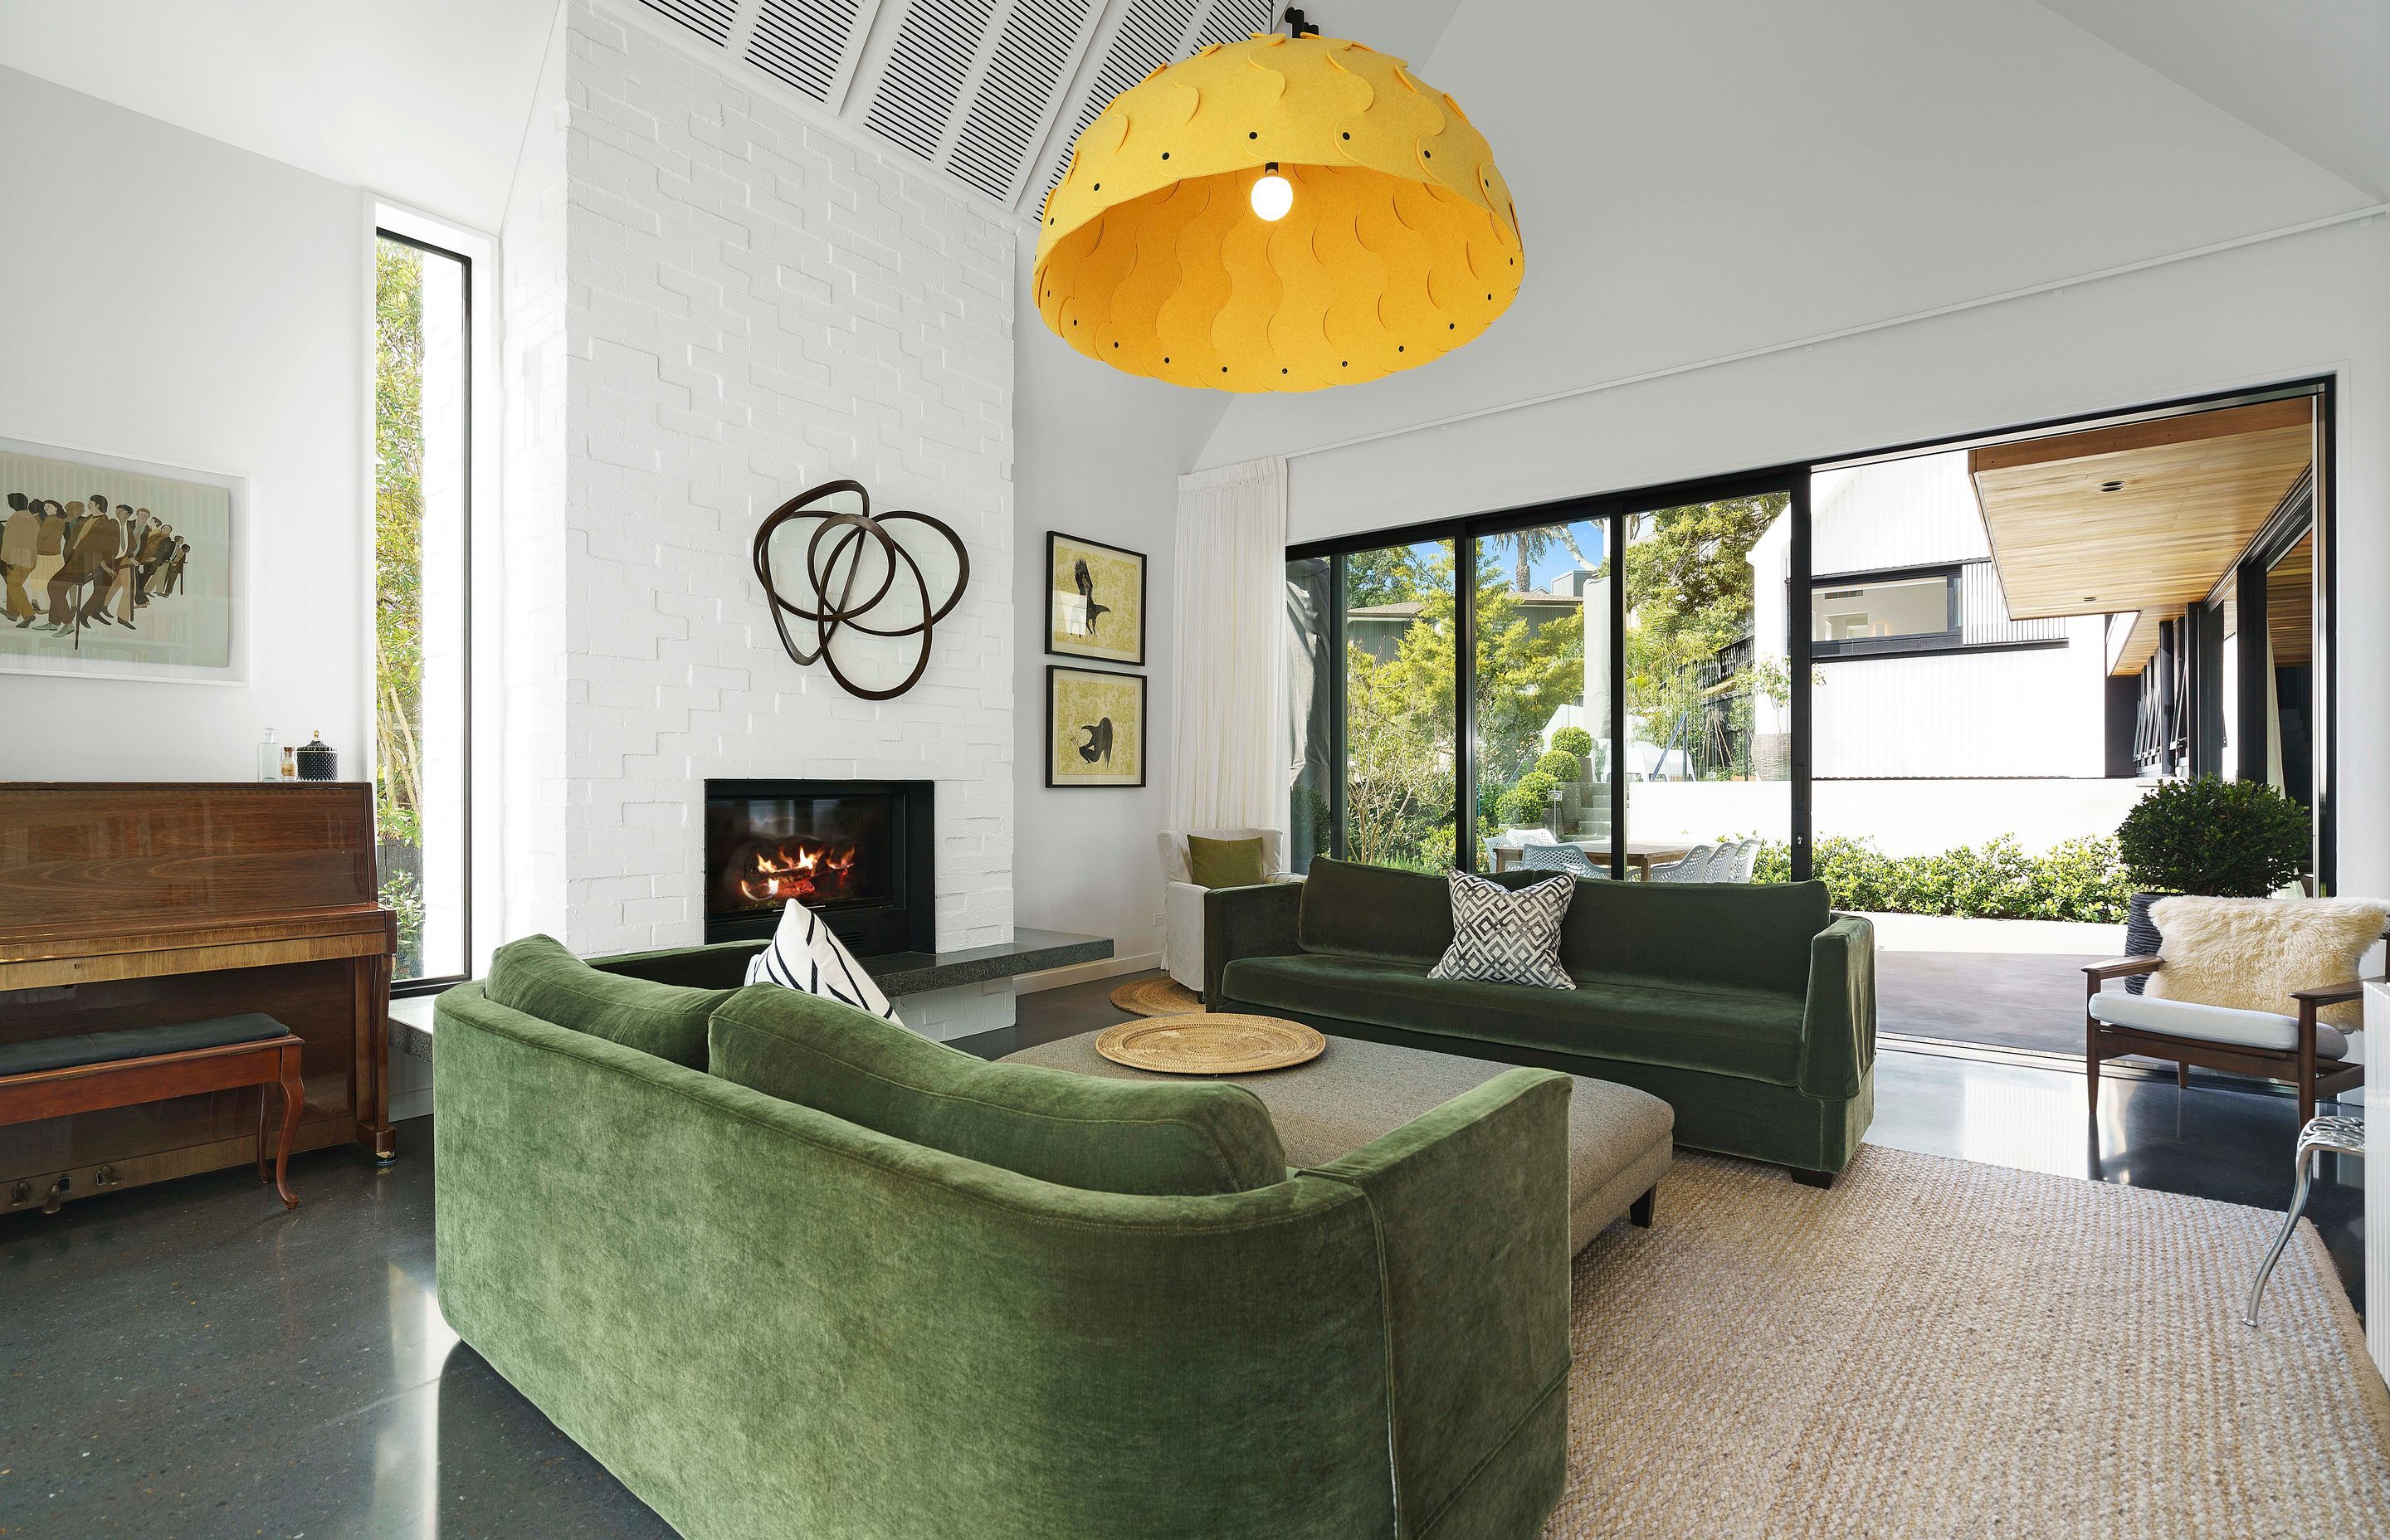 The skillion ceiling adds volumetric space to the living area while the bagged-brick chimney breast matches the exterior cladding of the white pavilions.